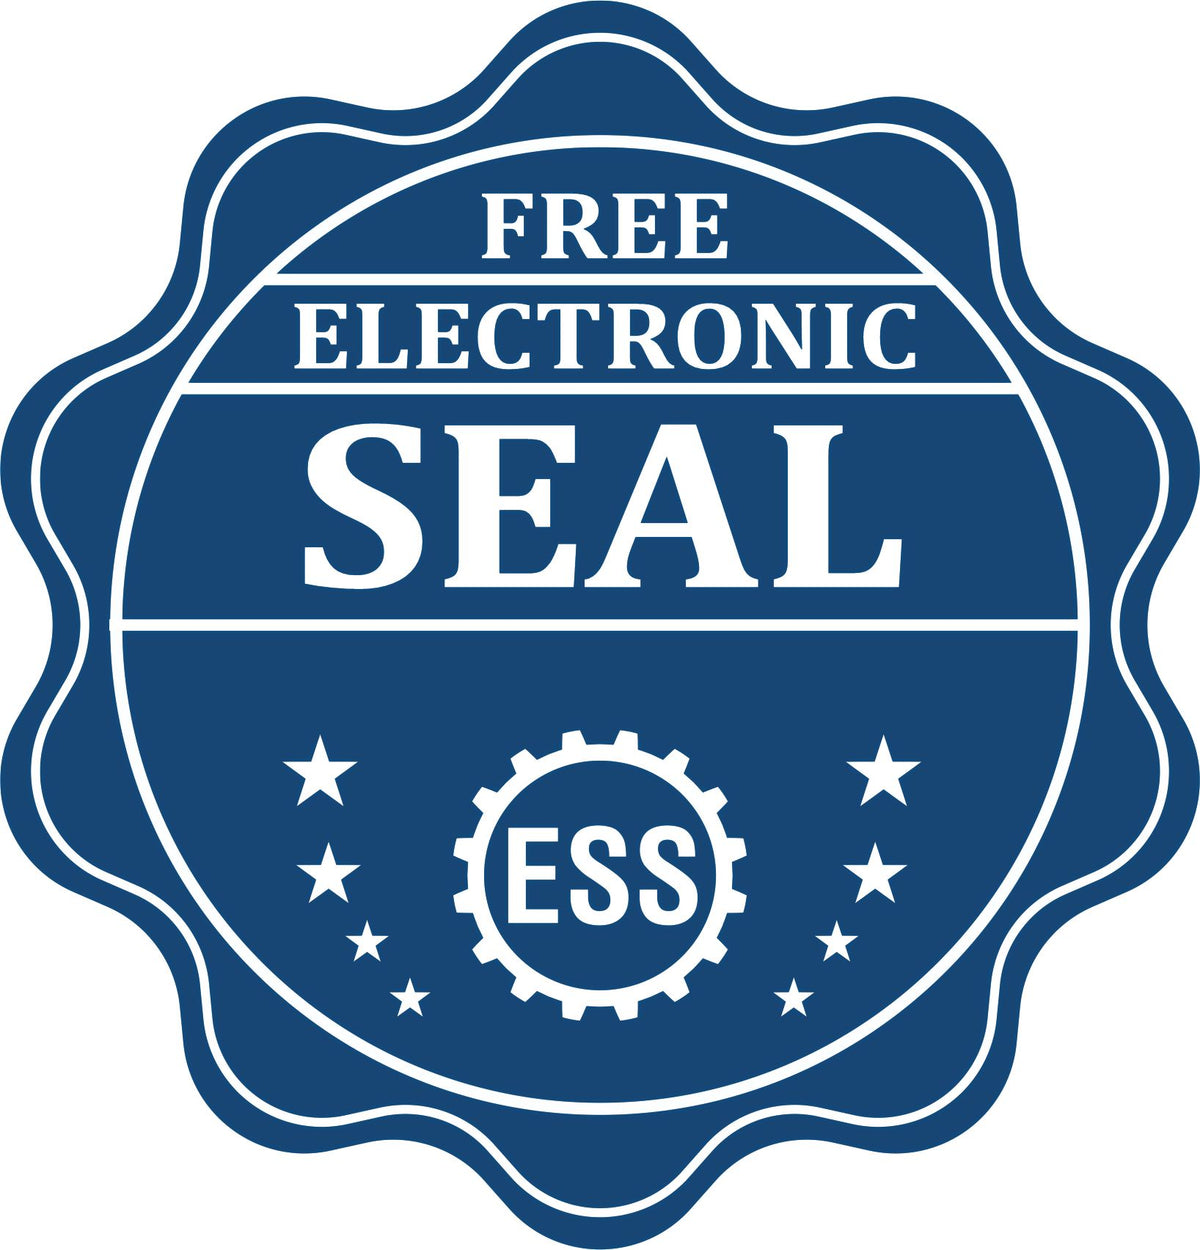 A badge showing a free electronic seal for the Self-Inking South Carolina Landscape Architect Stamp with stars and the ESS gear on the emblem.